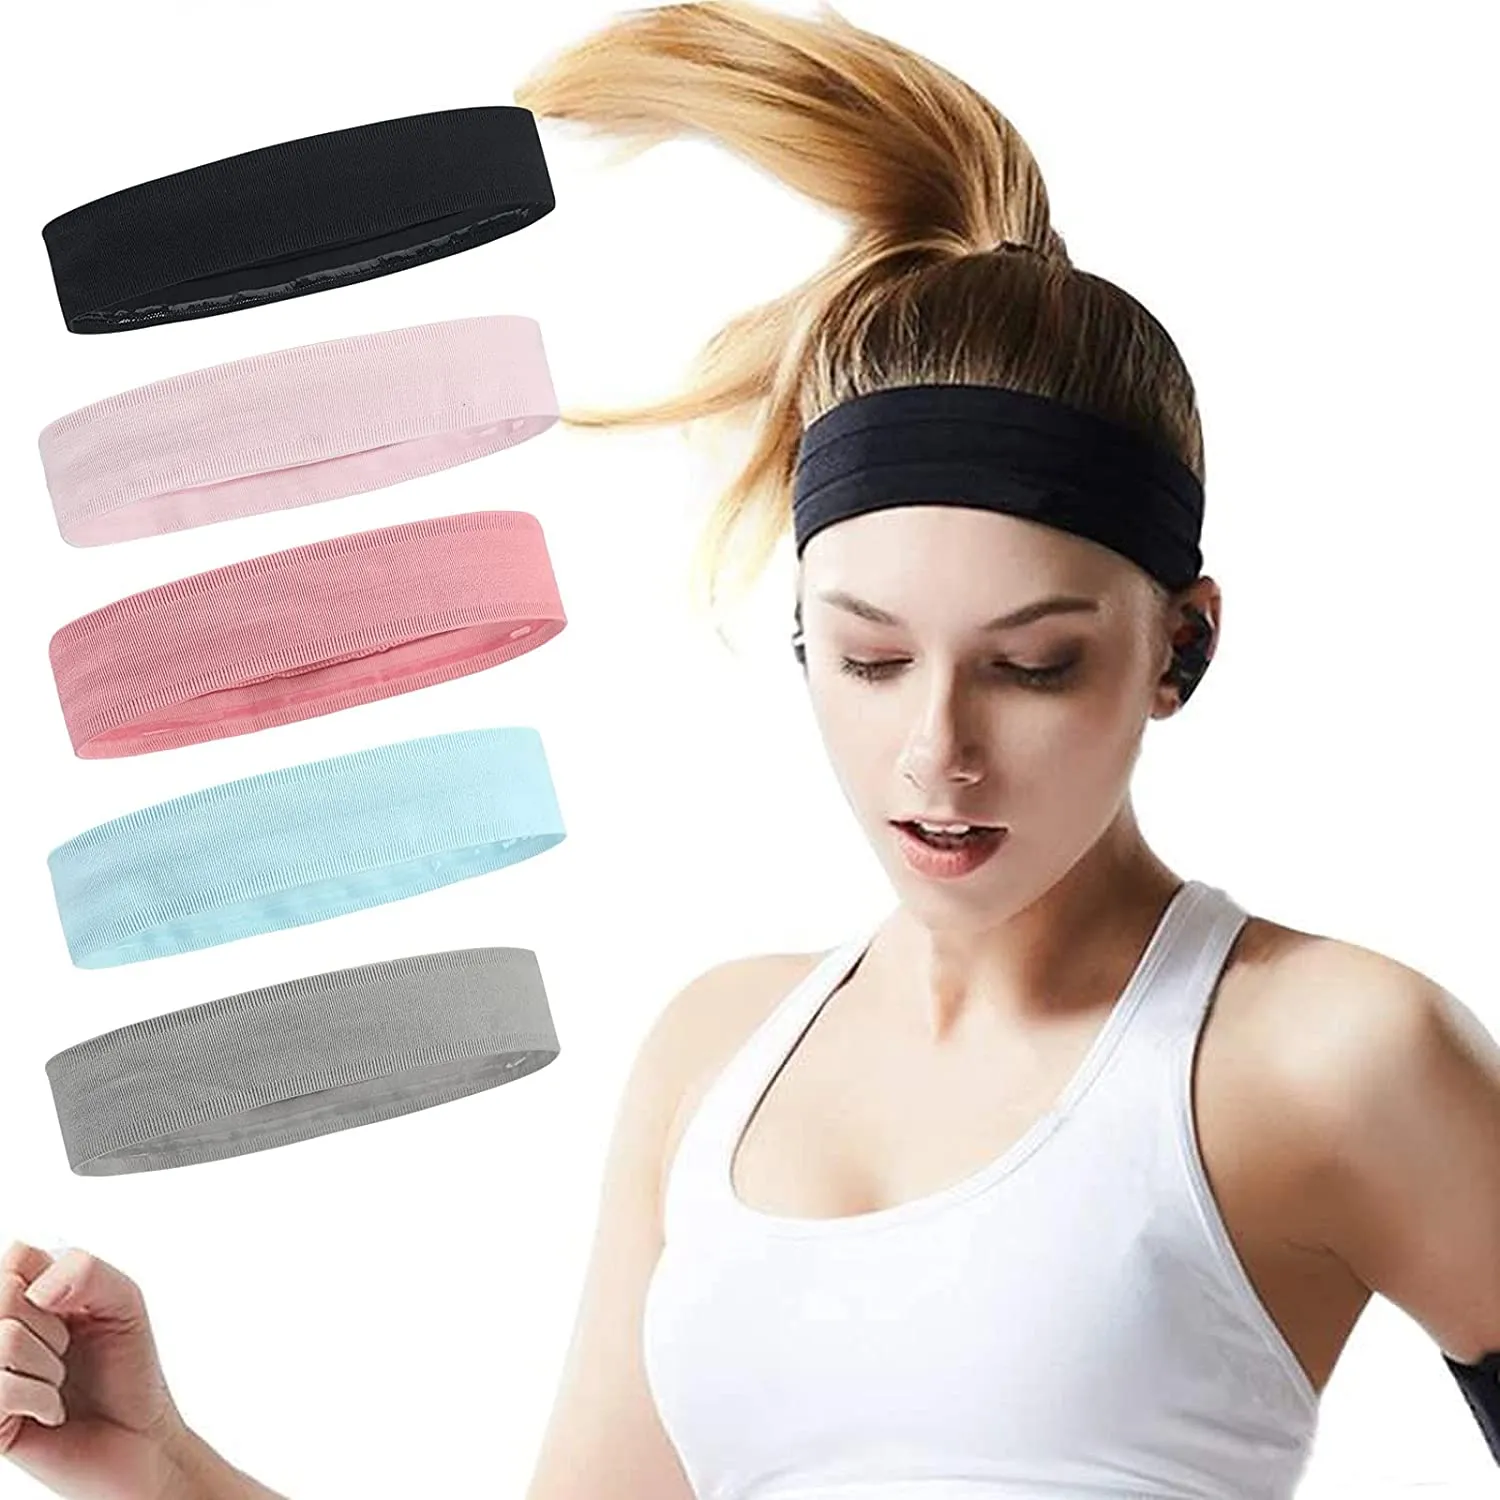 Simple Sports Hairband Non-Slip Elastic Sweat Guide Headbands For Women Solid Color Yoga Running Fitness Hair Accessories Gifts